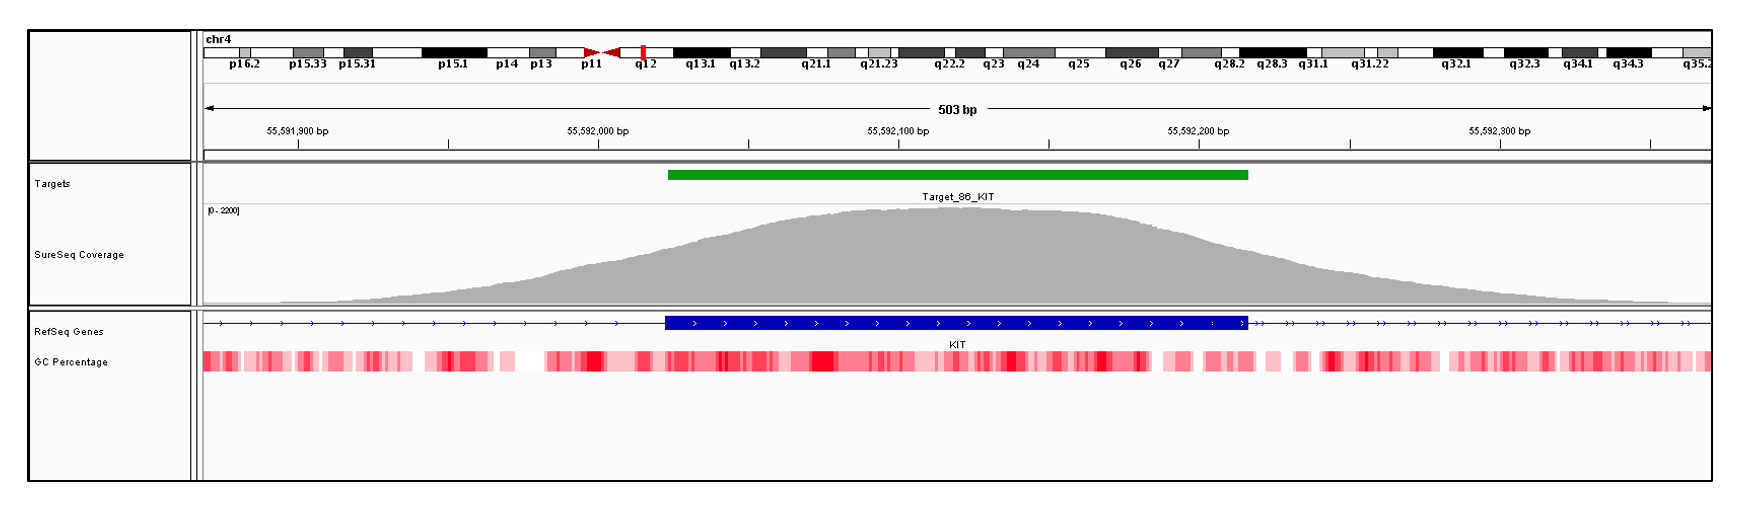 KIT Exon 9 (hg19 chr4:55592023-55592216). Depth of coverage per base (grey). Targeted region (green). Gene coding region as defined by RefSeq (blue). GC percentage (red). Image